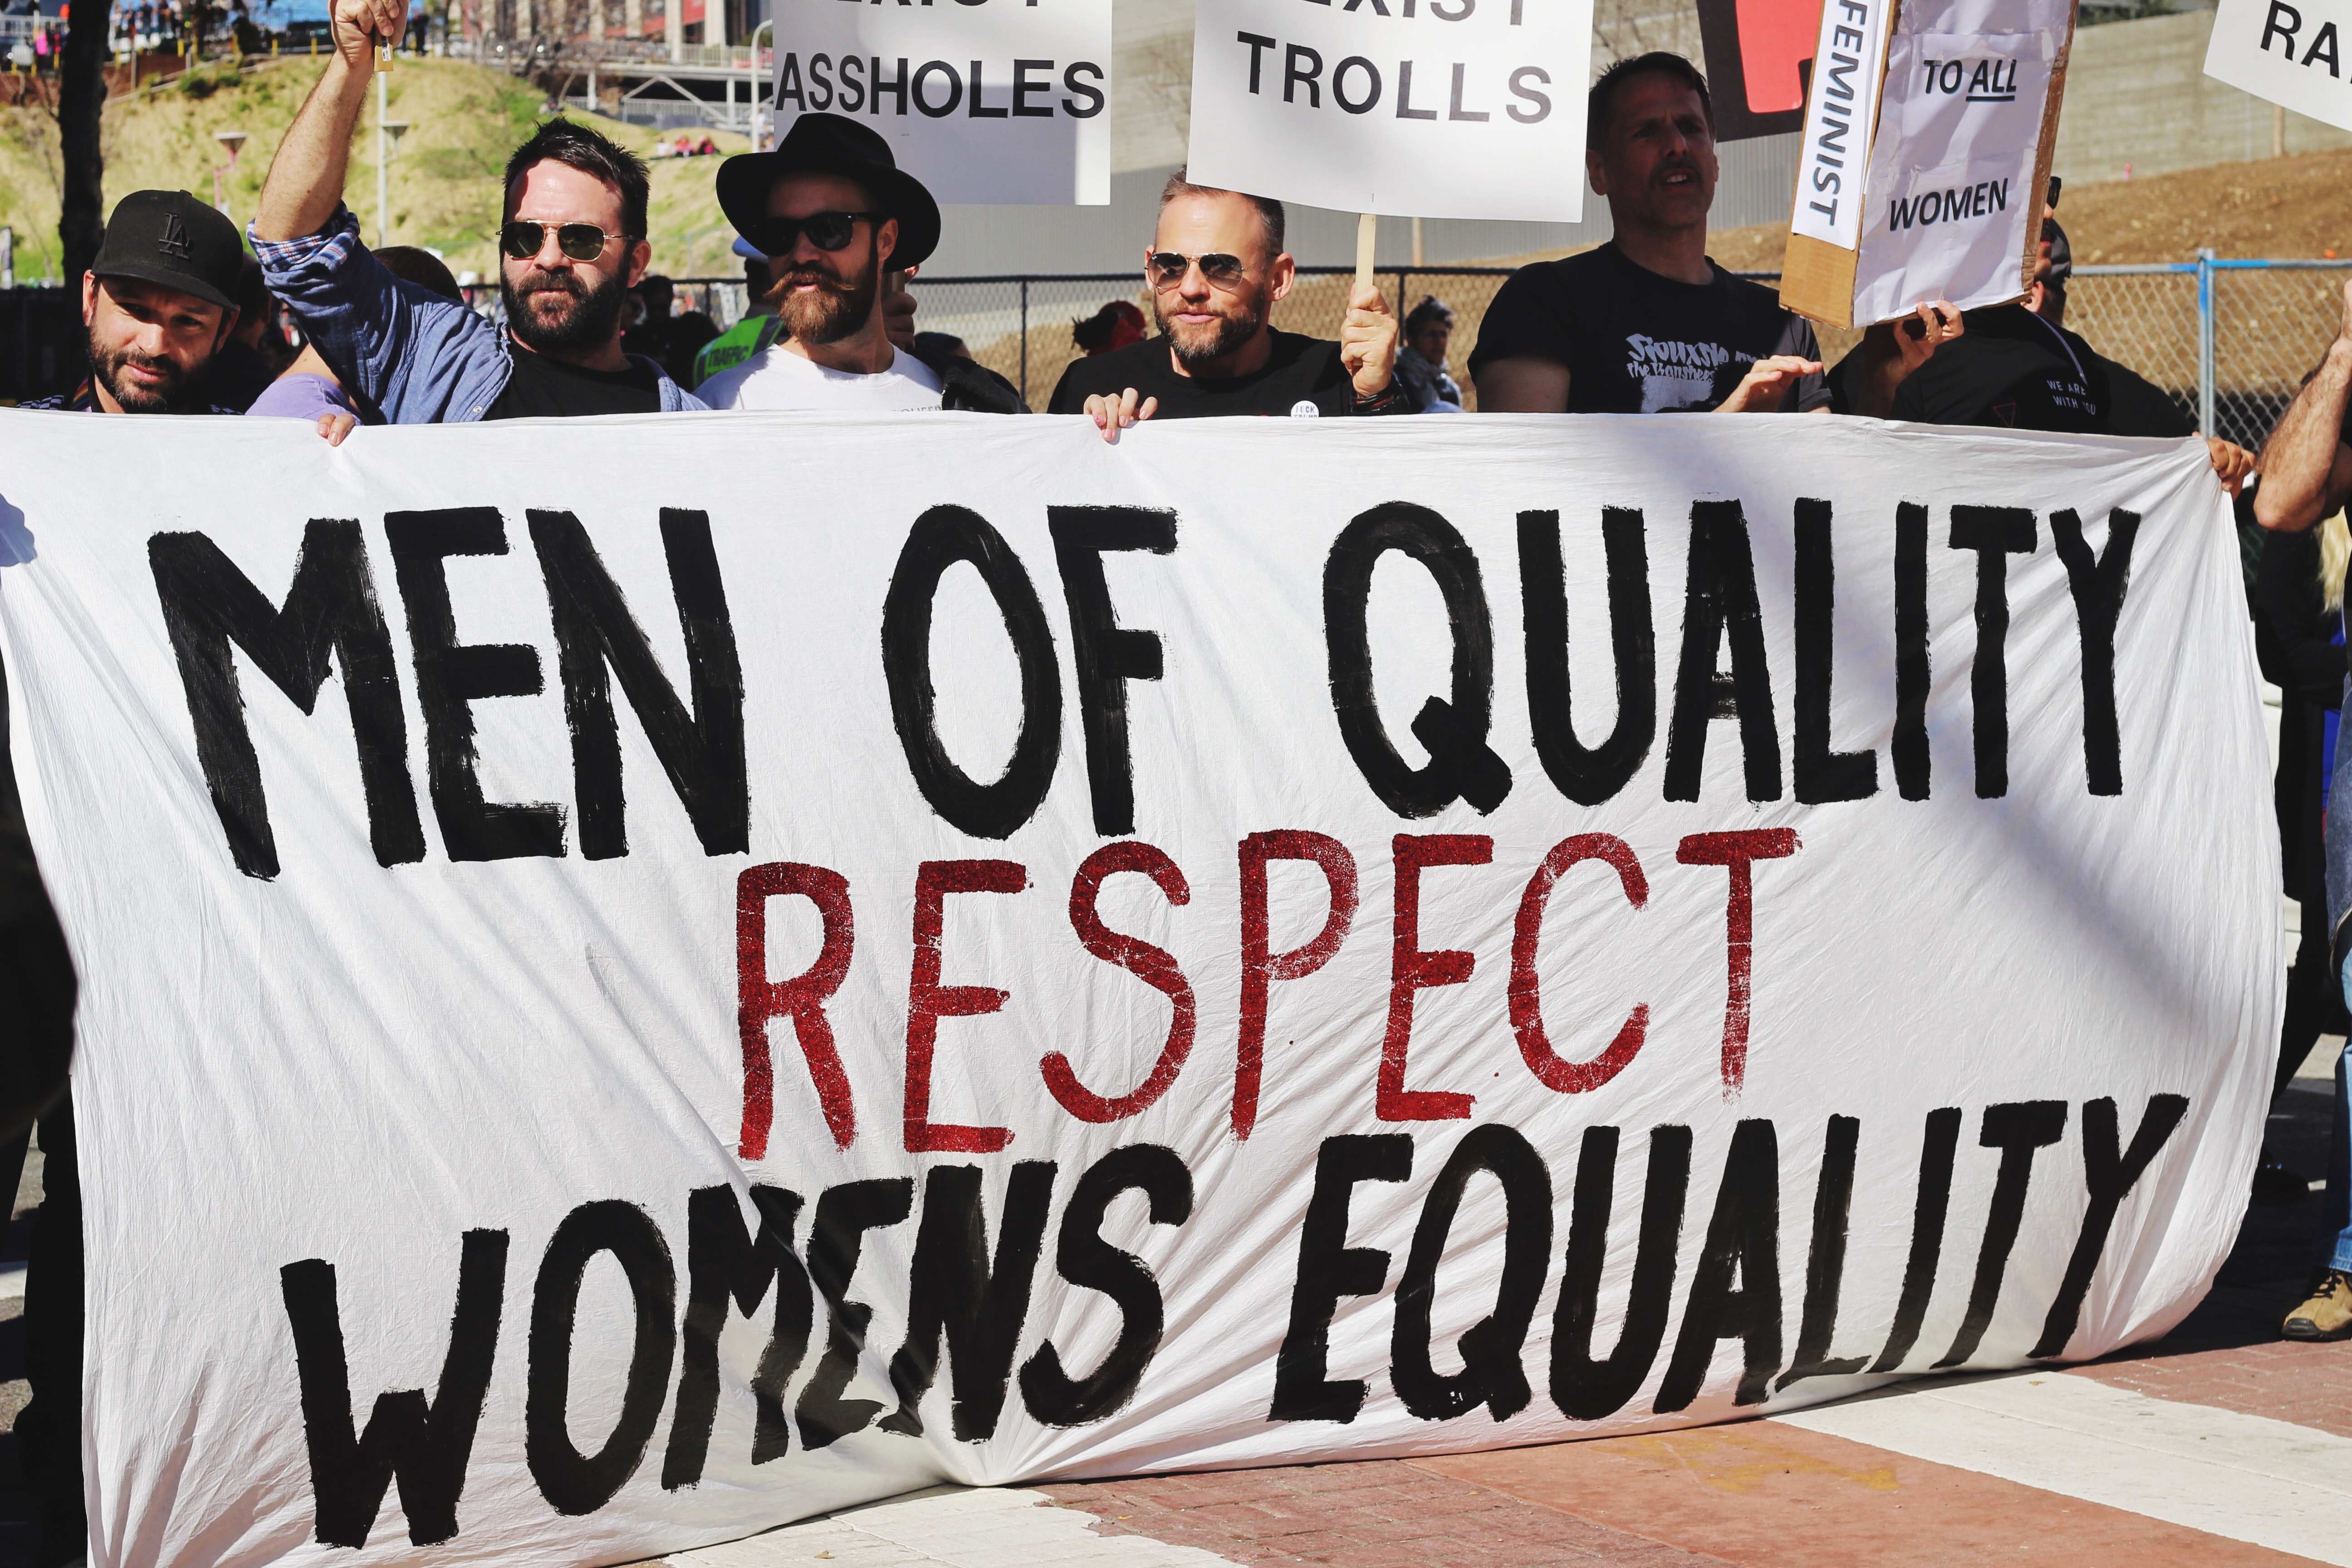 The role of men in achieving gender equality